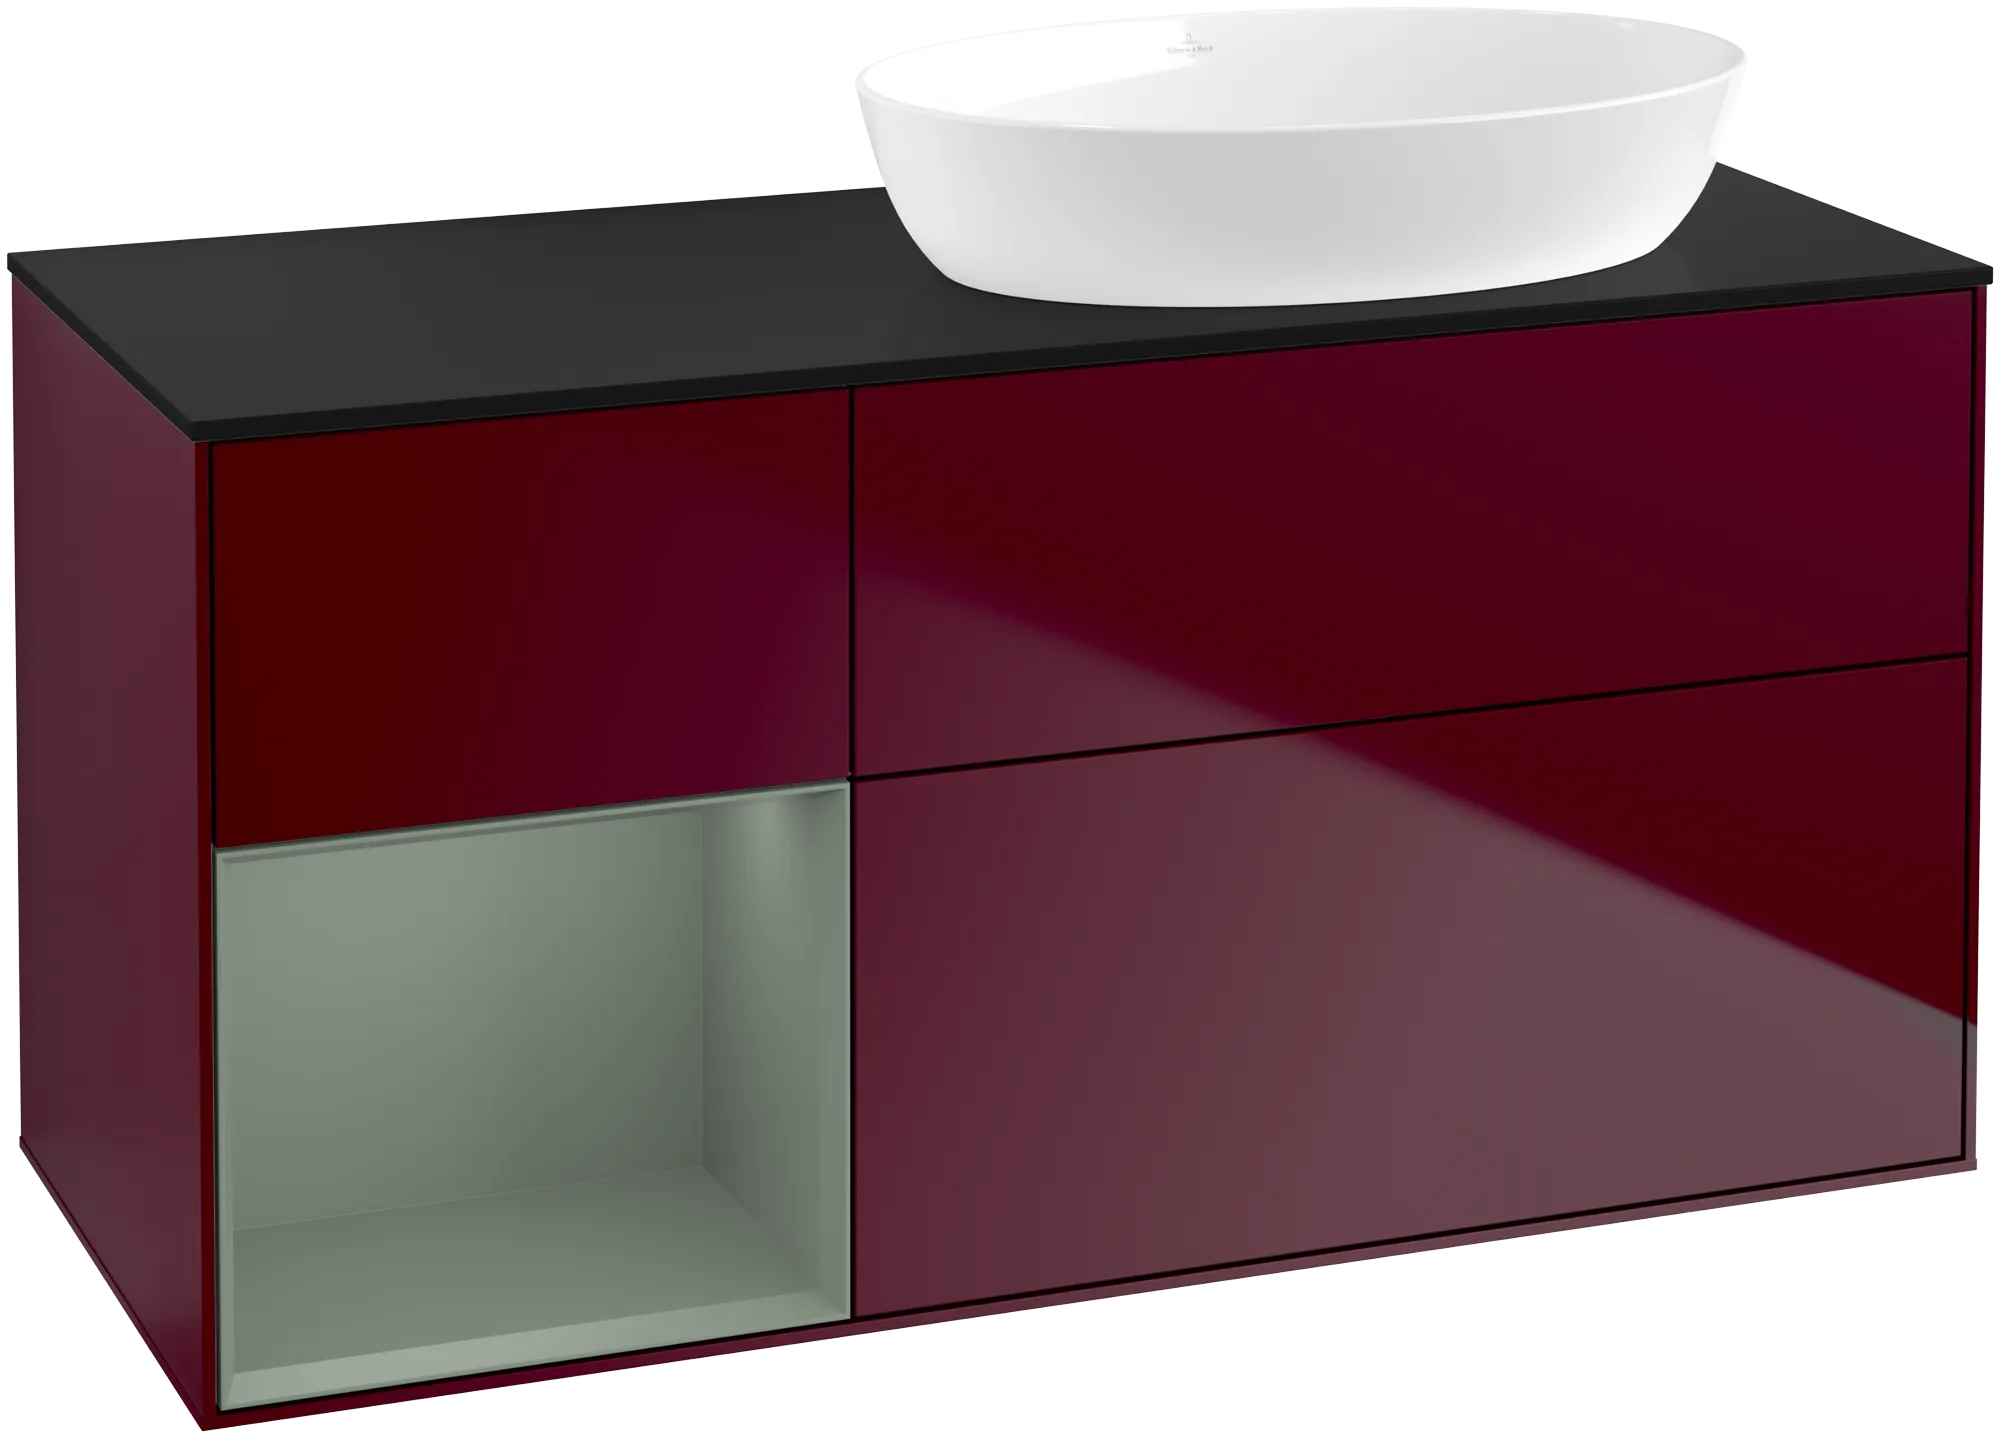 Picture of VILLEROY BOCH Finion Vanity unit, with lighting, 3 pull-out compartments, 1200 x 603 x 501 mm, Peony Matt Lacquer / Olive Matt Lacquer / Glass Black Matt #FA42GMHB